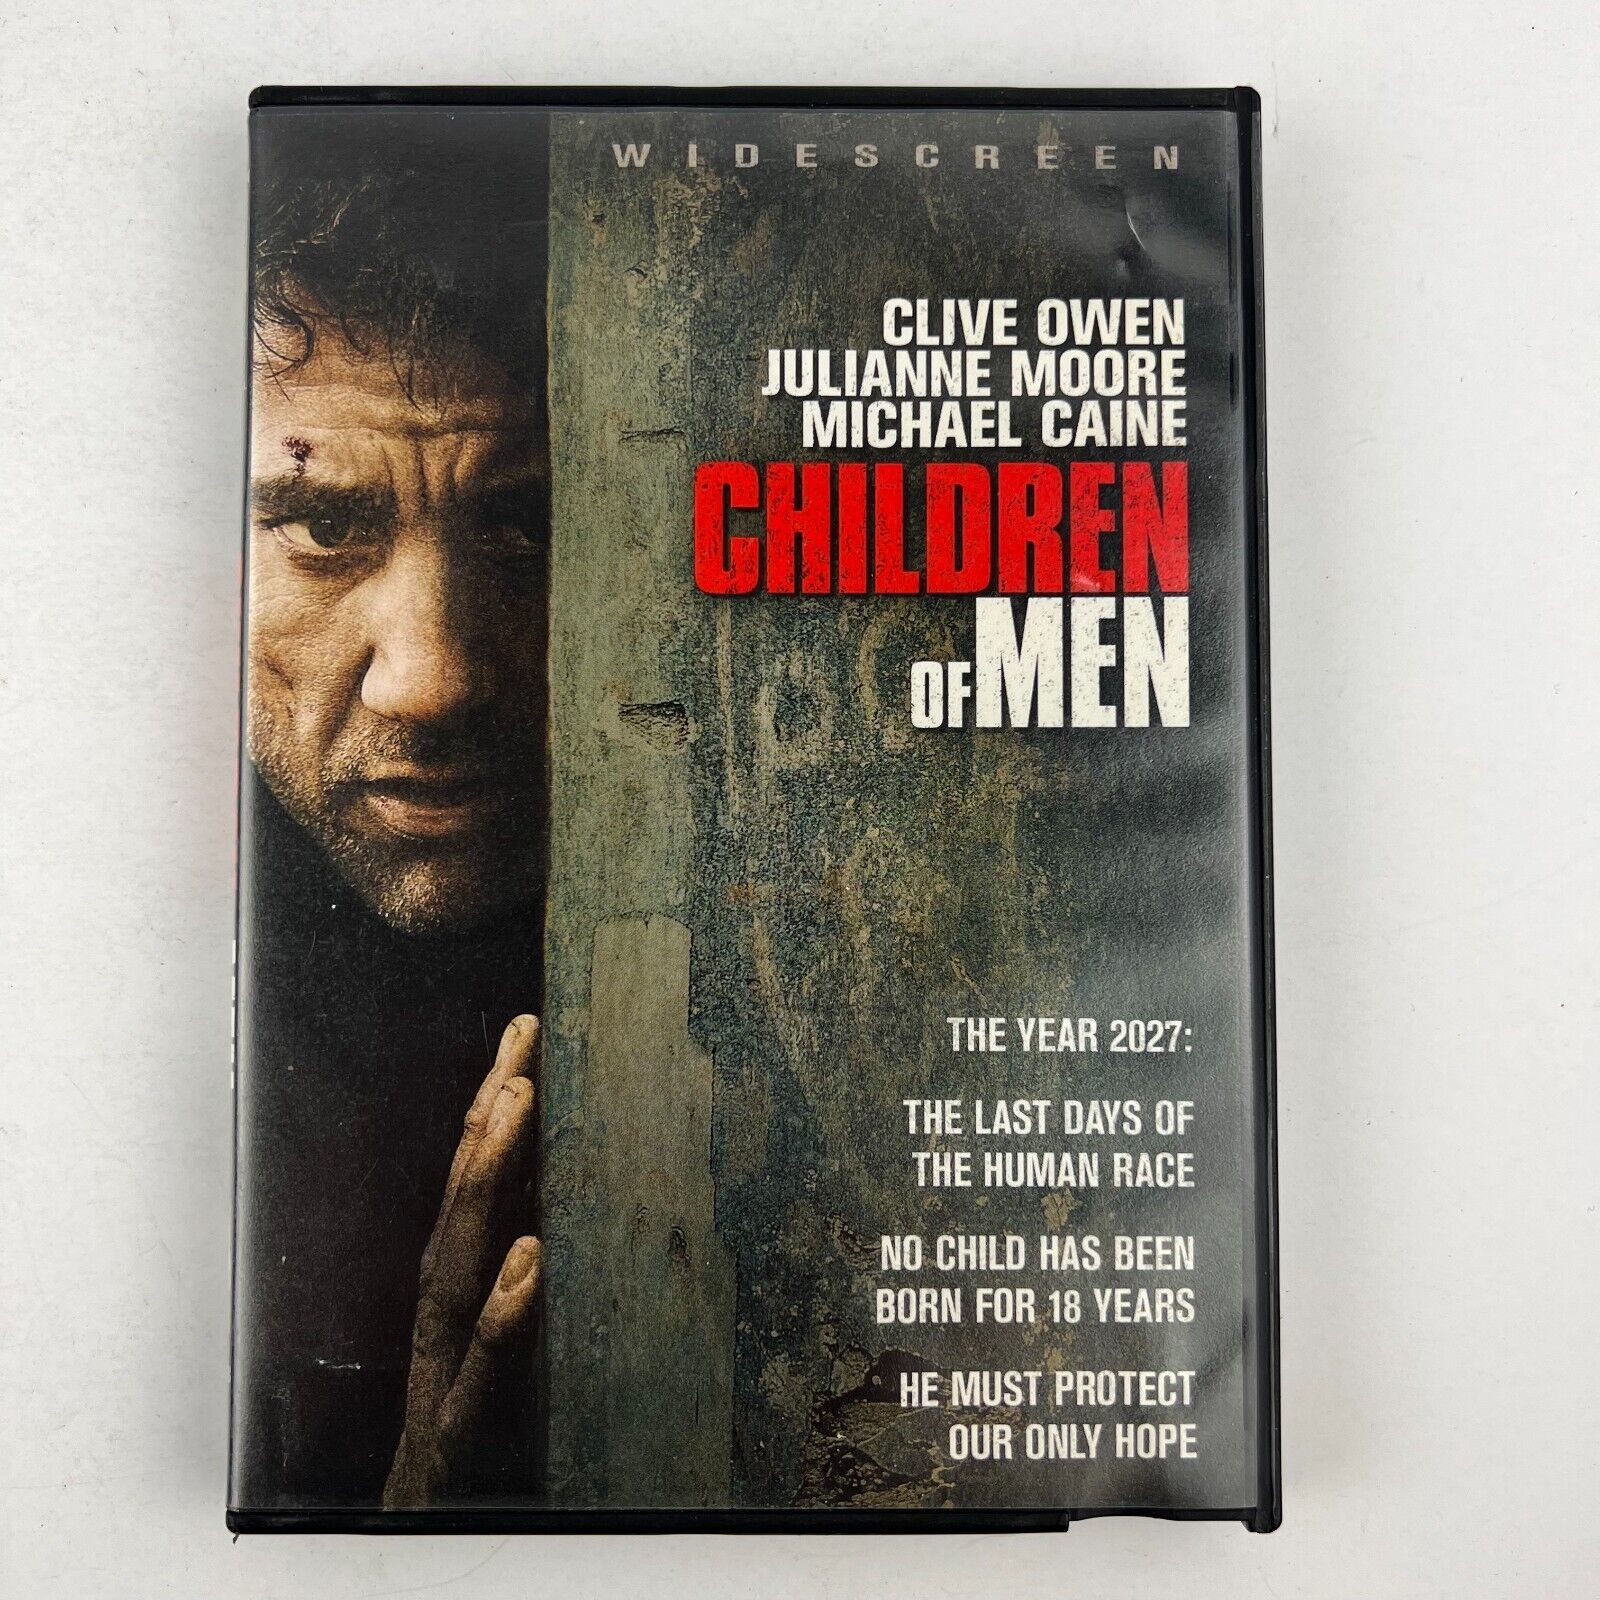 Primary image for Children of Men DVD Clive Owen, Julianne Moore, Michael Caine